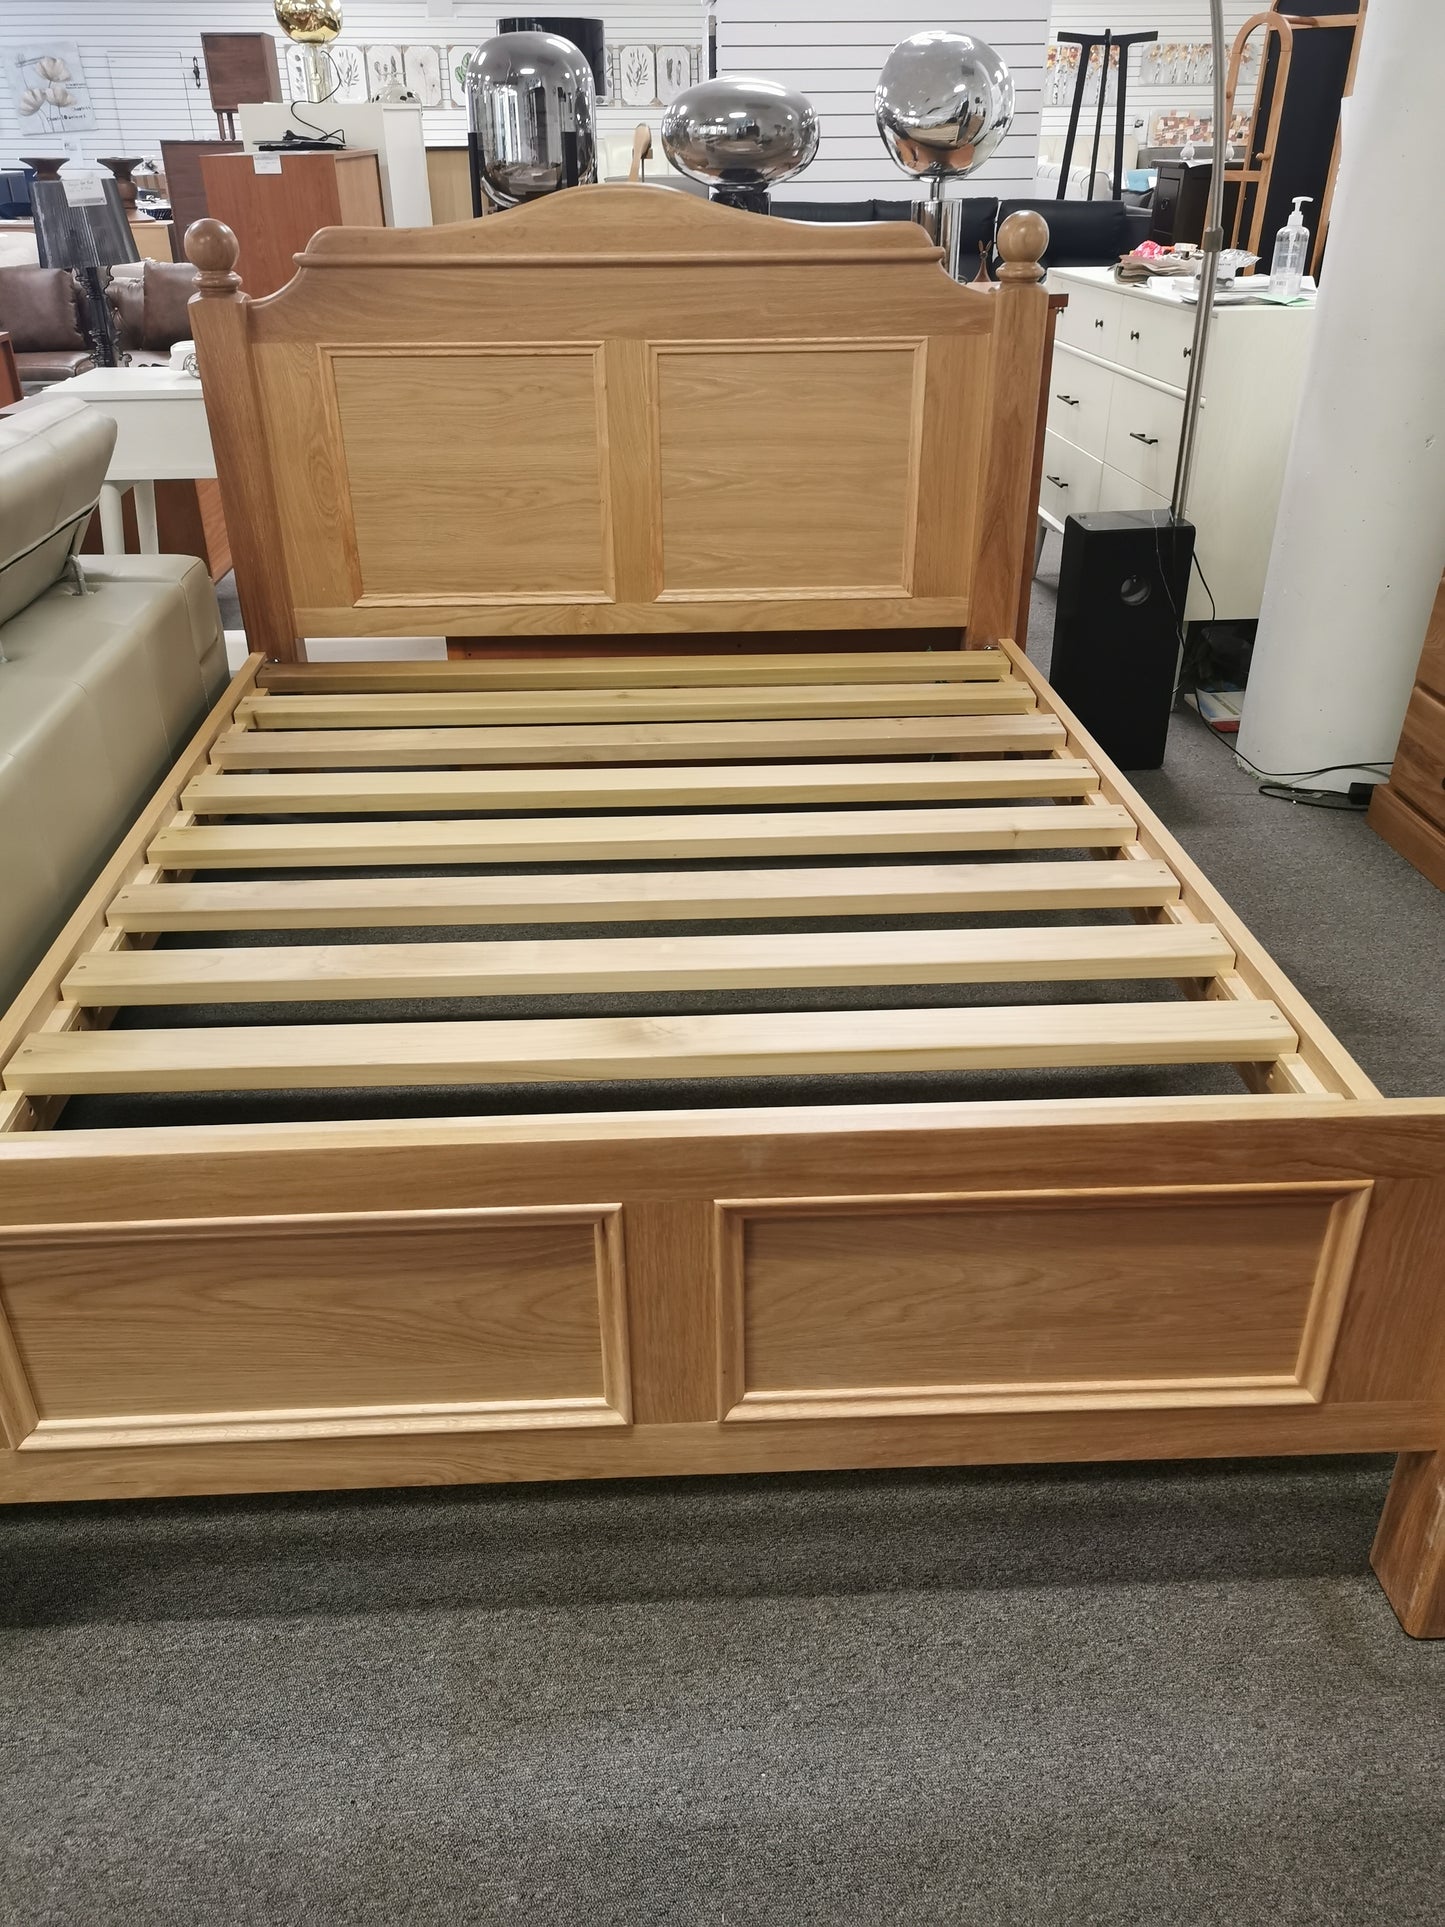 Solid Oak Bed Frame,  queen and king size natural colour.